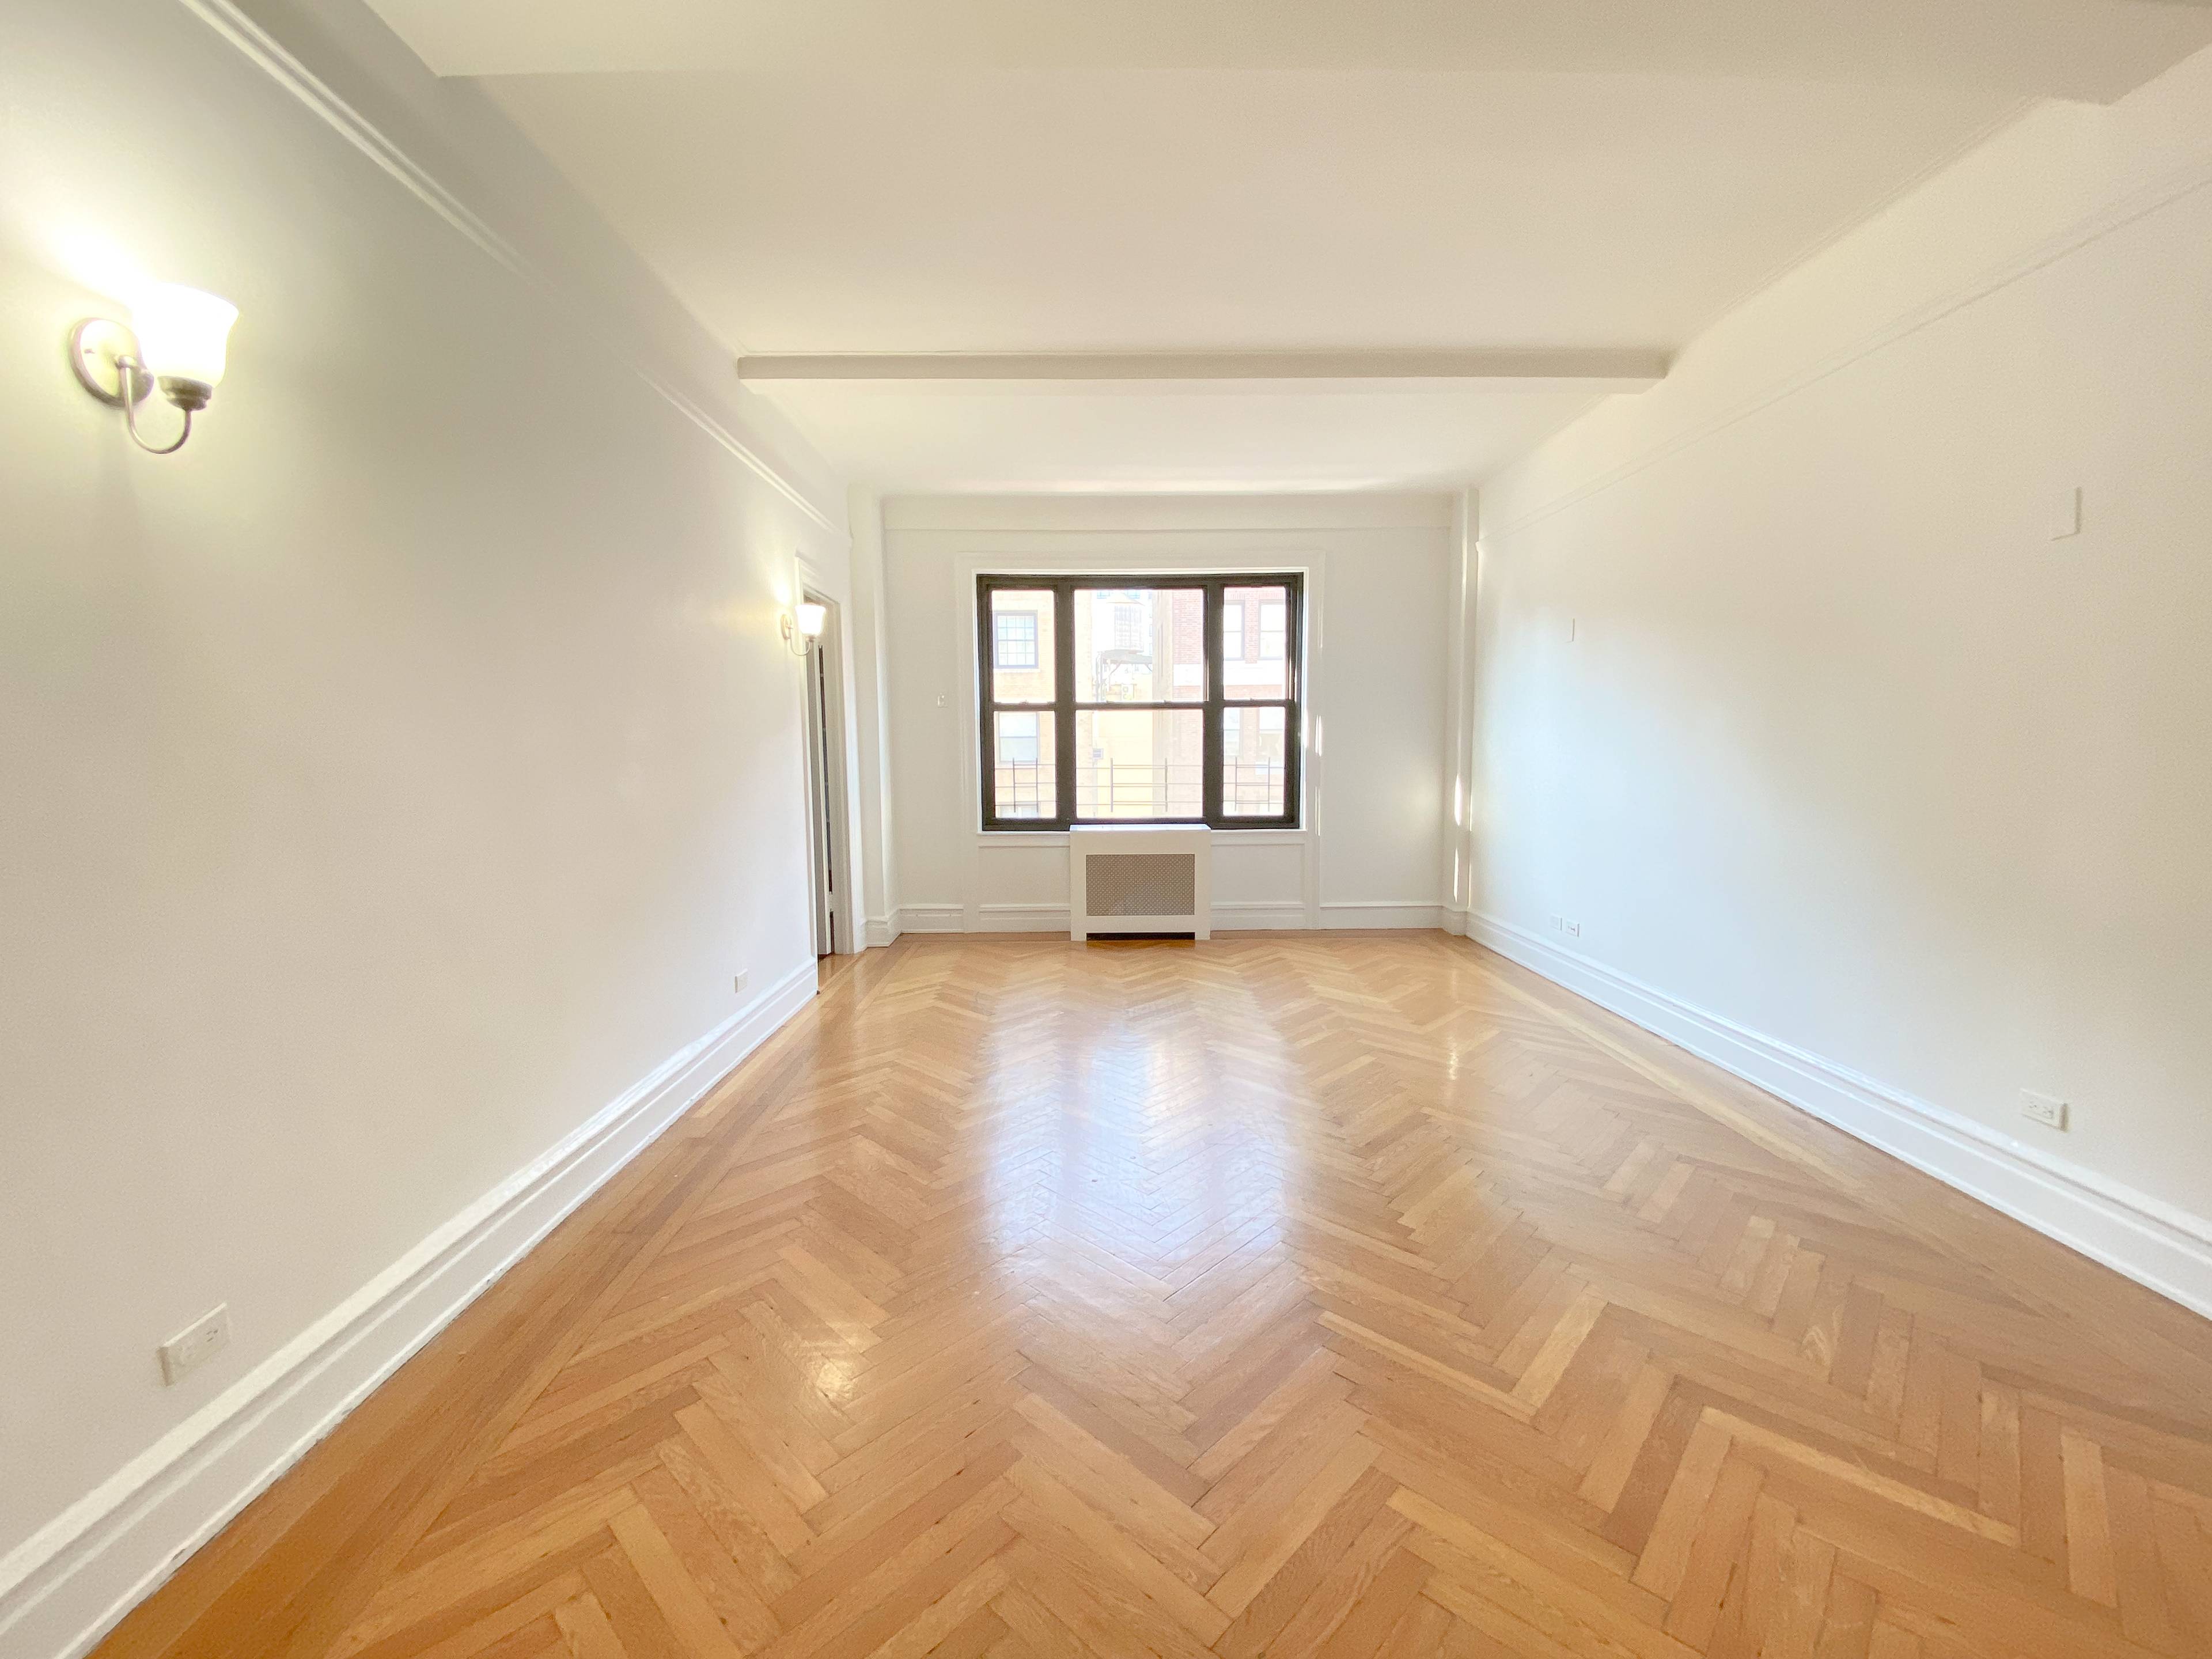 Spacious 3 bedroom in Lenox Hill a few blocks away from the French Lycée